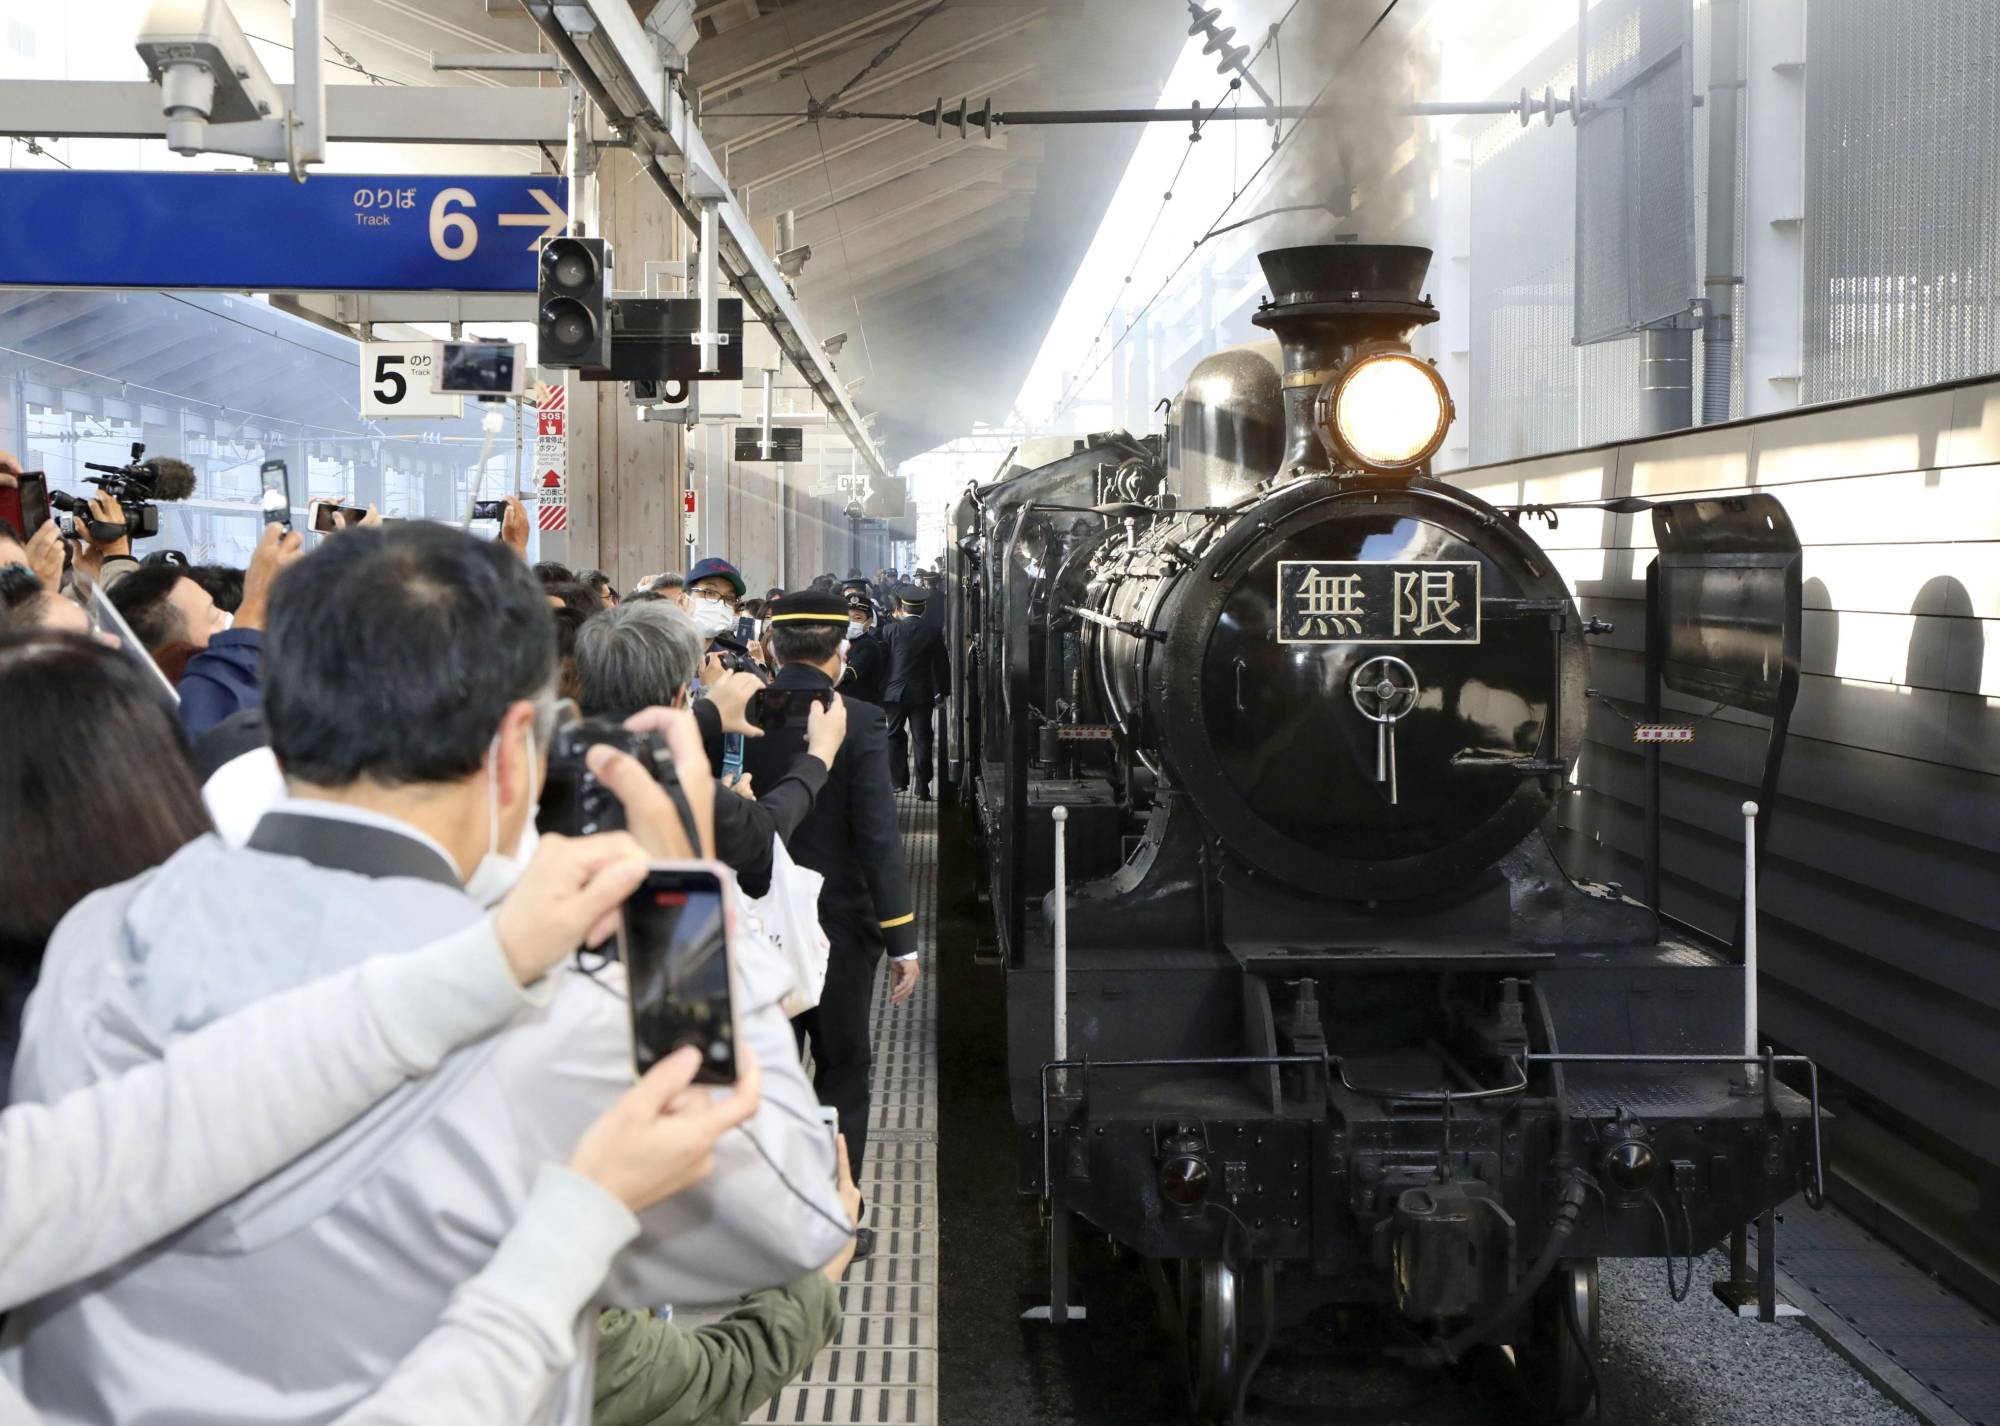 People take photos of a special train with livery in the style of the movie of the popular 'Demon Slayer' ('Kimetsu no Yaiba') manga series at Kumamoto Station on Sunday. | KYODO